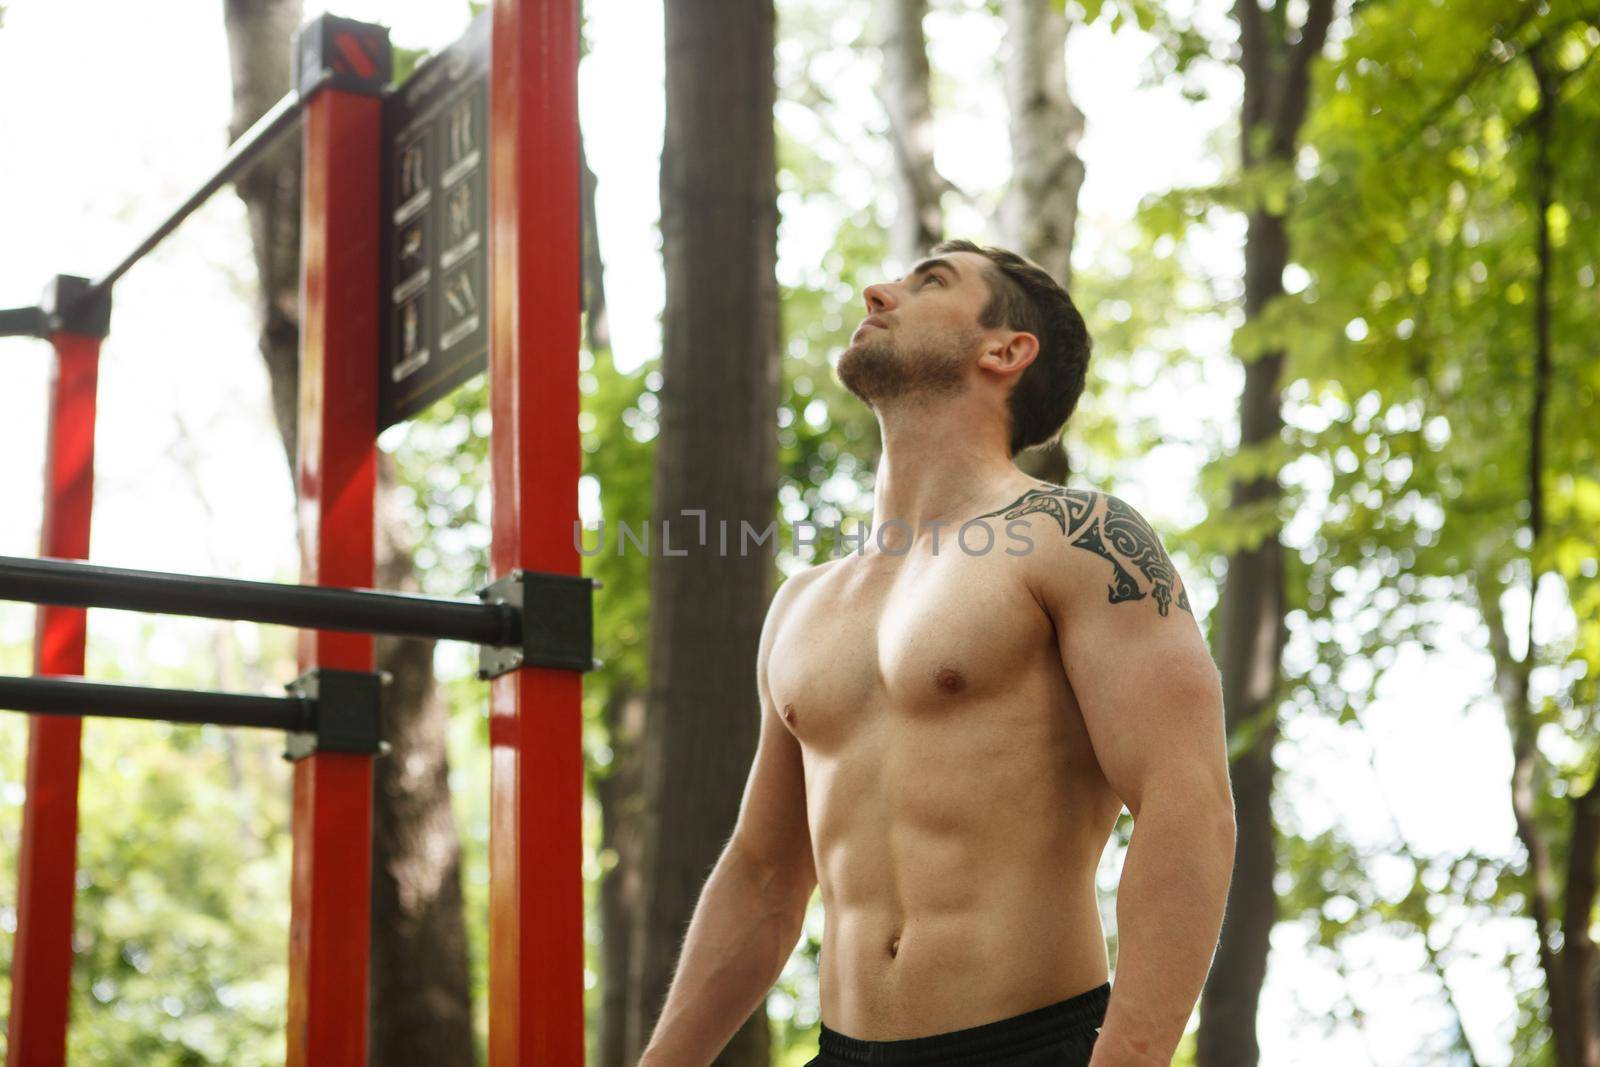 Handsome muscular man standing shirtless outdoors after working out